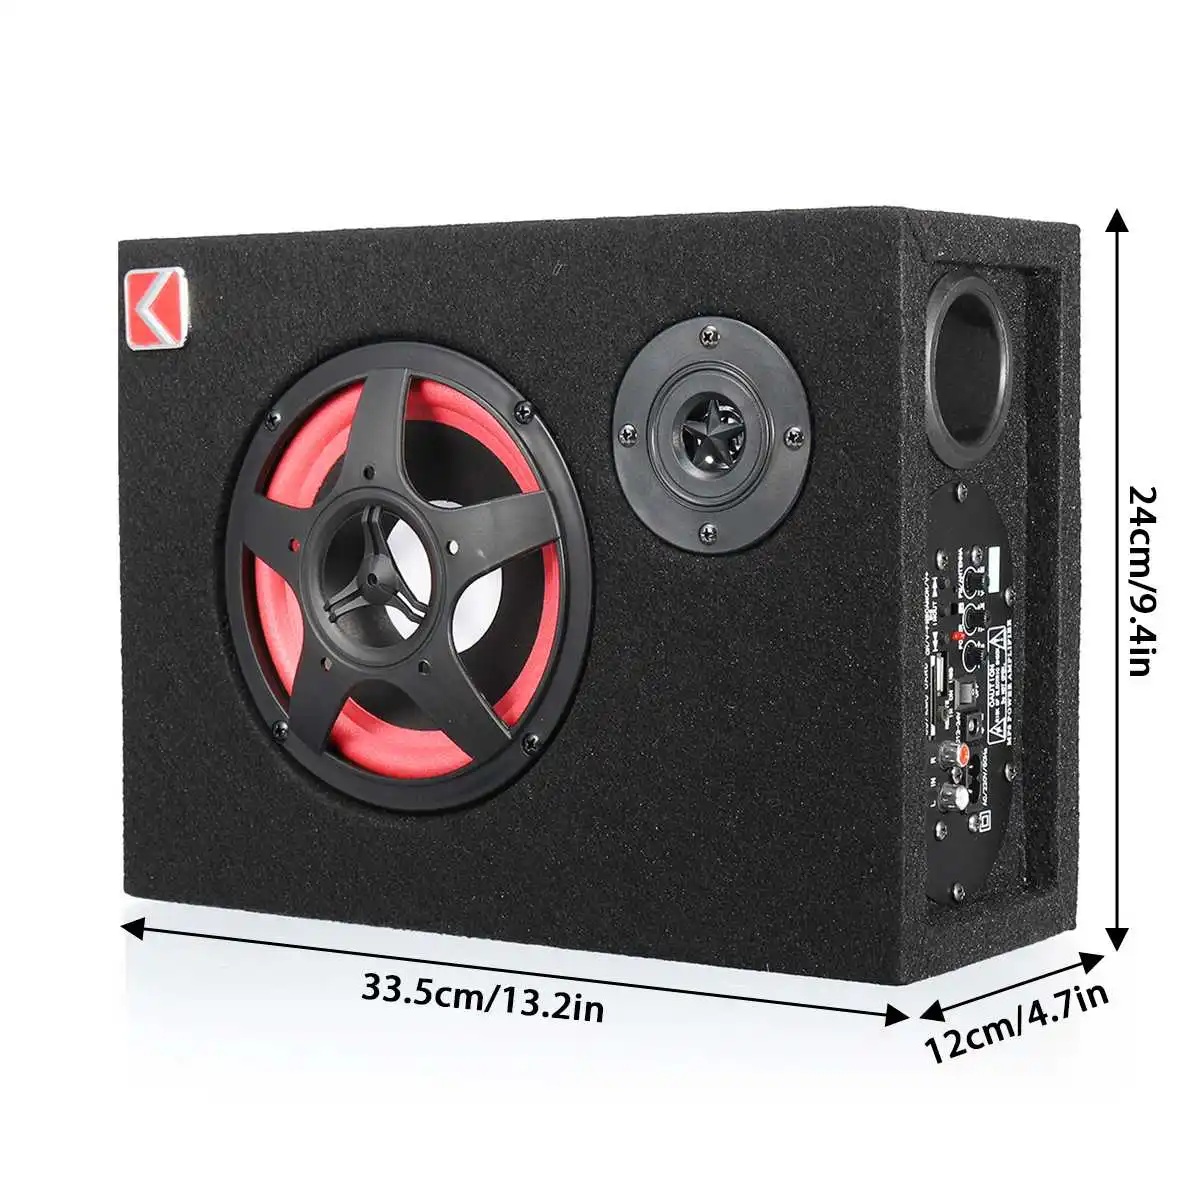 

350W Home HIFI Subwoofer Auto Amplifier Stereo Bass Under Seat Active Powerful 6inch Card Car Seat Power Digital Audio Speaker